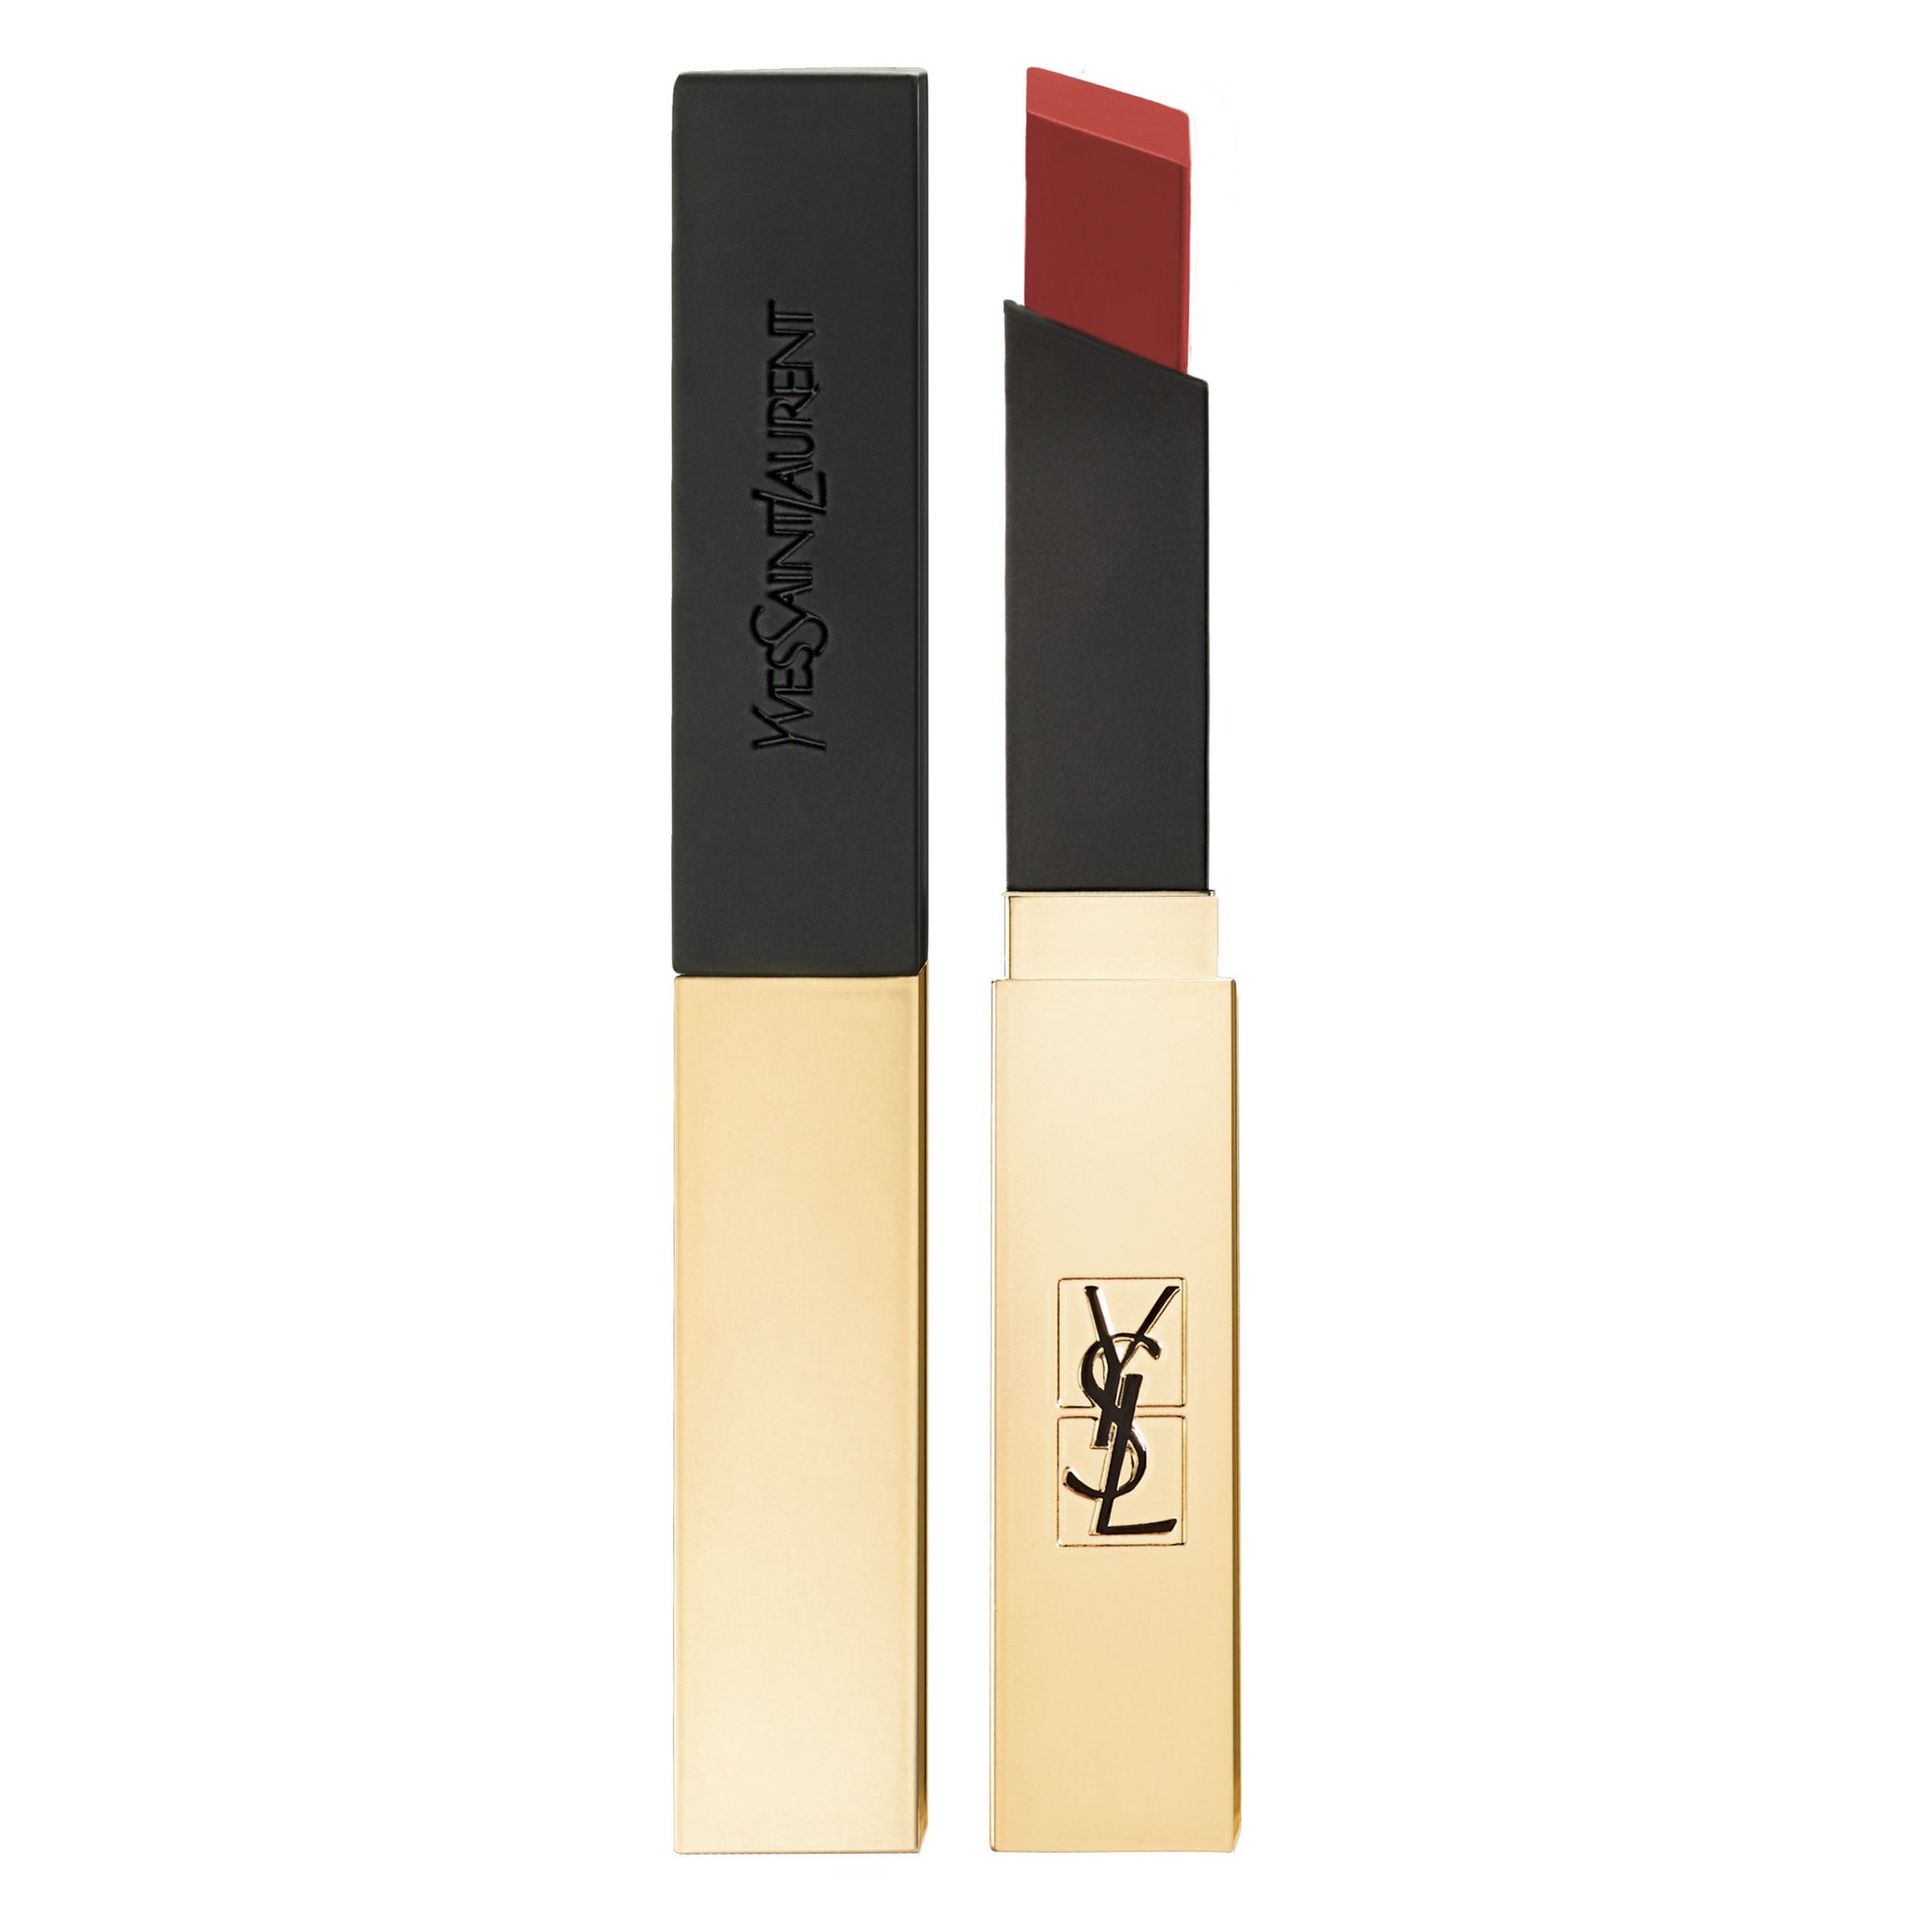 Yves Saint Laurent Rouge Pur Couture The Slim odcień 9 Red Enigma 2,2 g